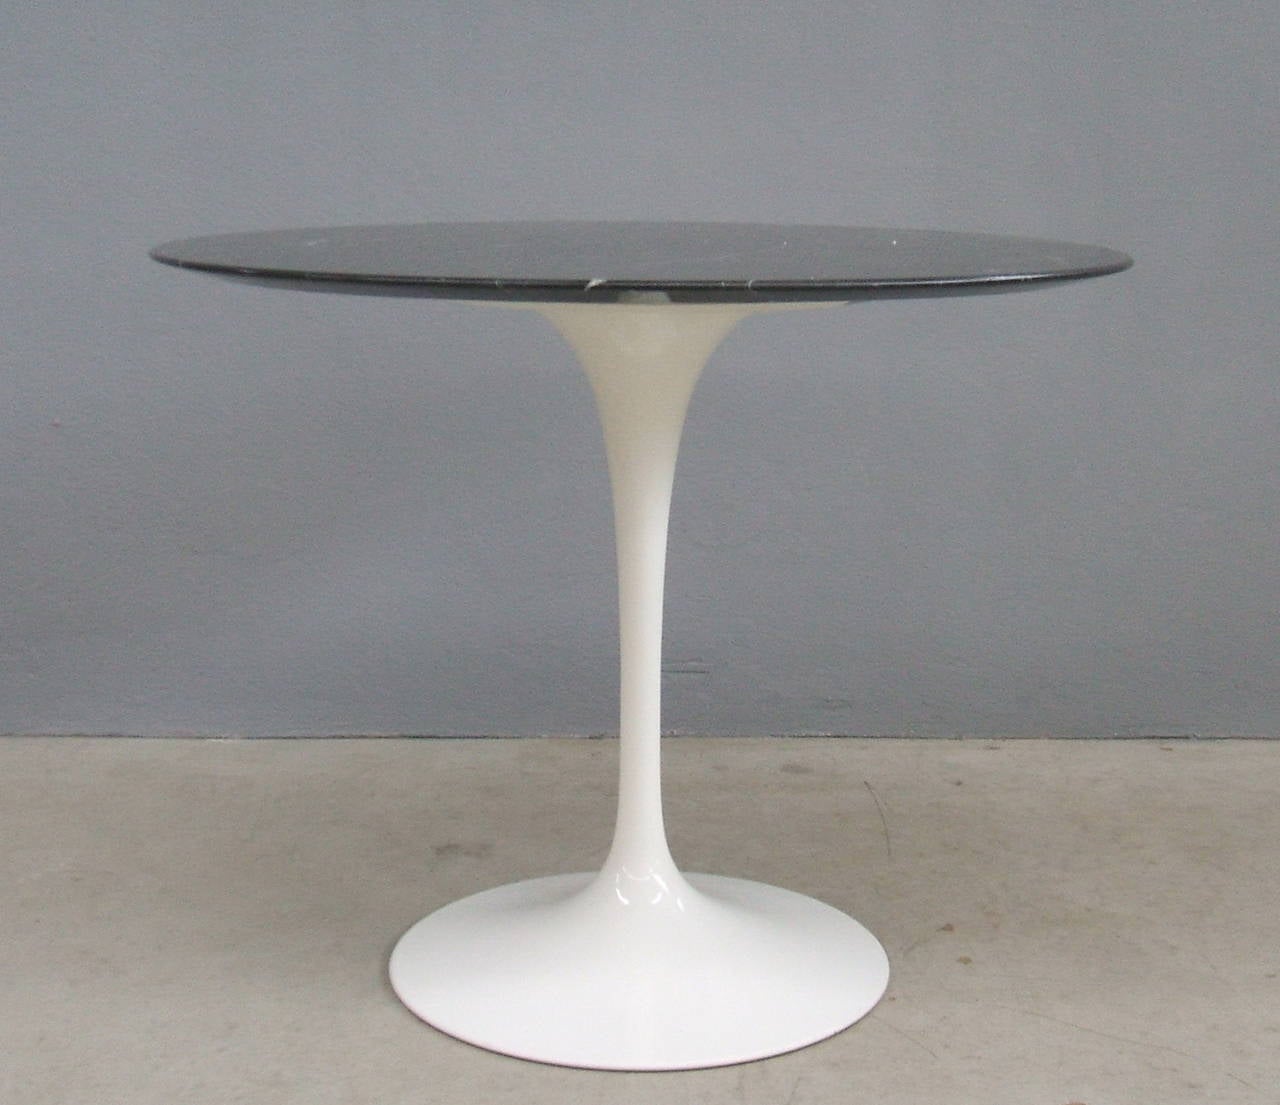 Pedestal table designed by Saarinen in 1956 and produced by Knoll International. Foot in cast aluminum white paint and tabletop in black marble.